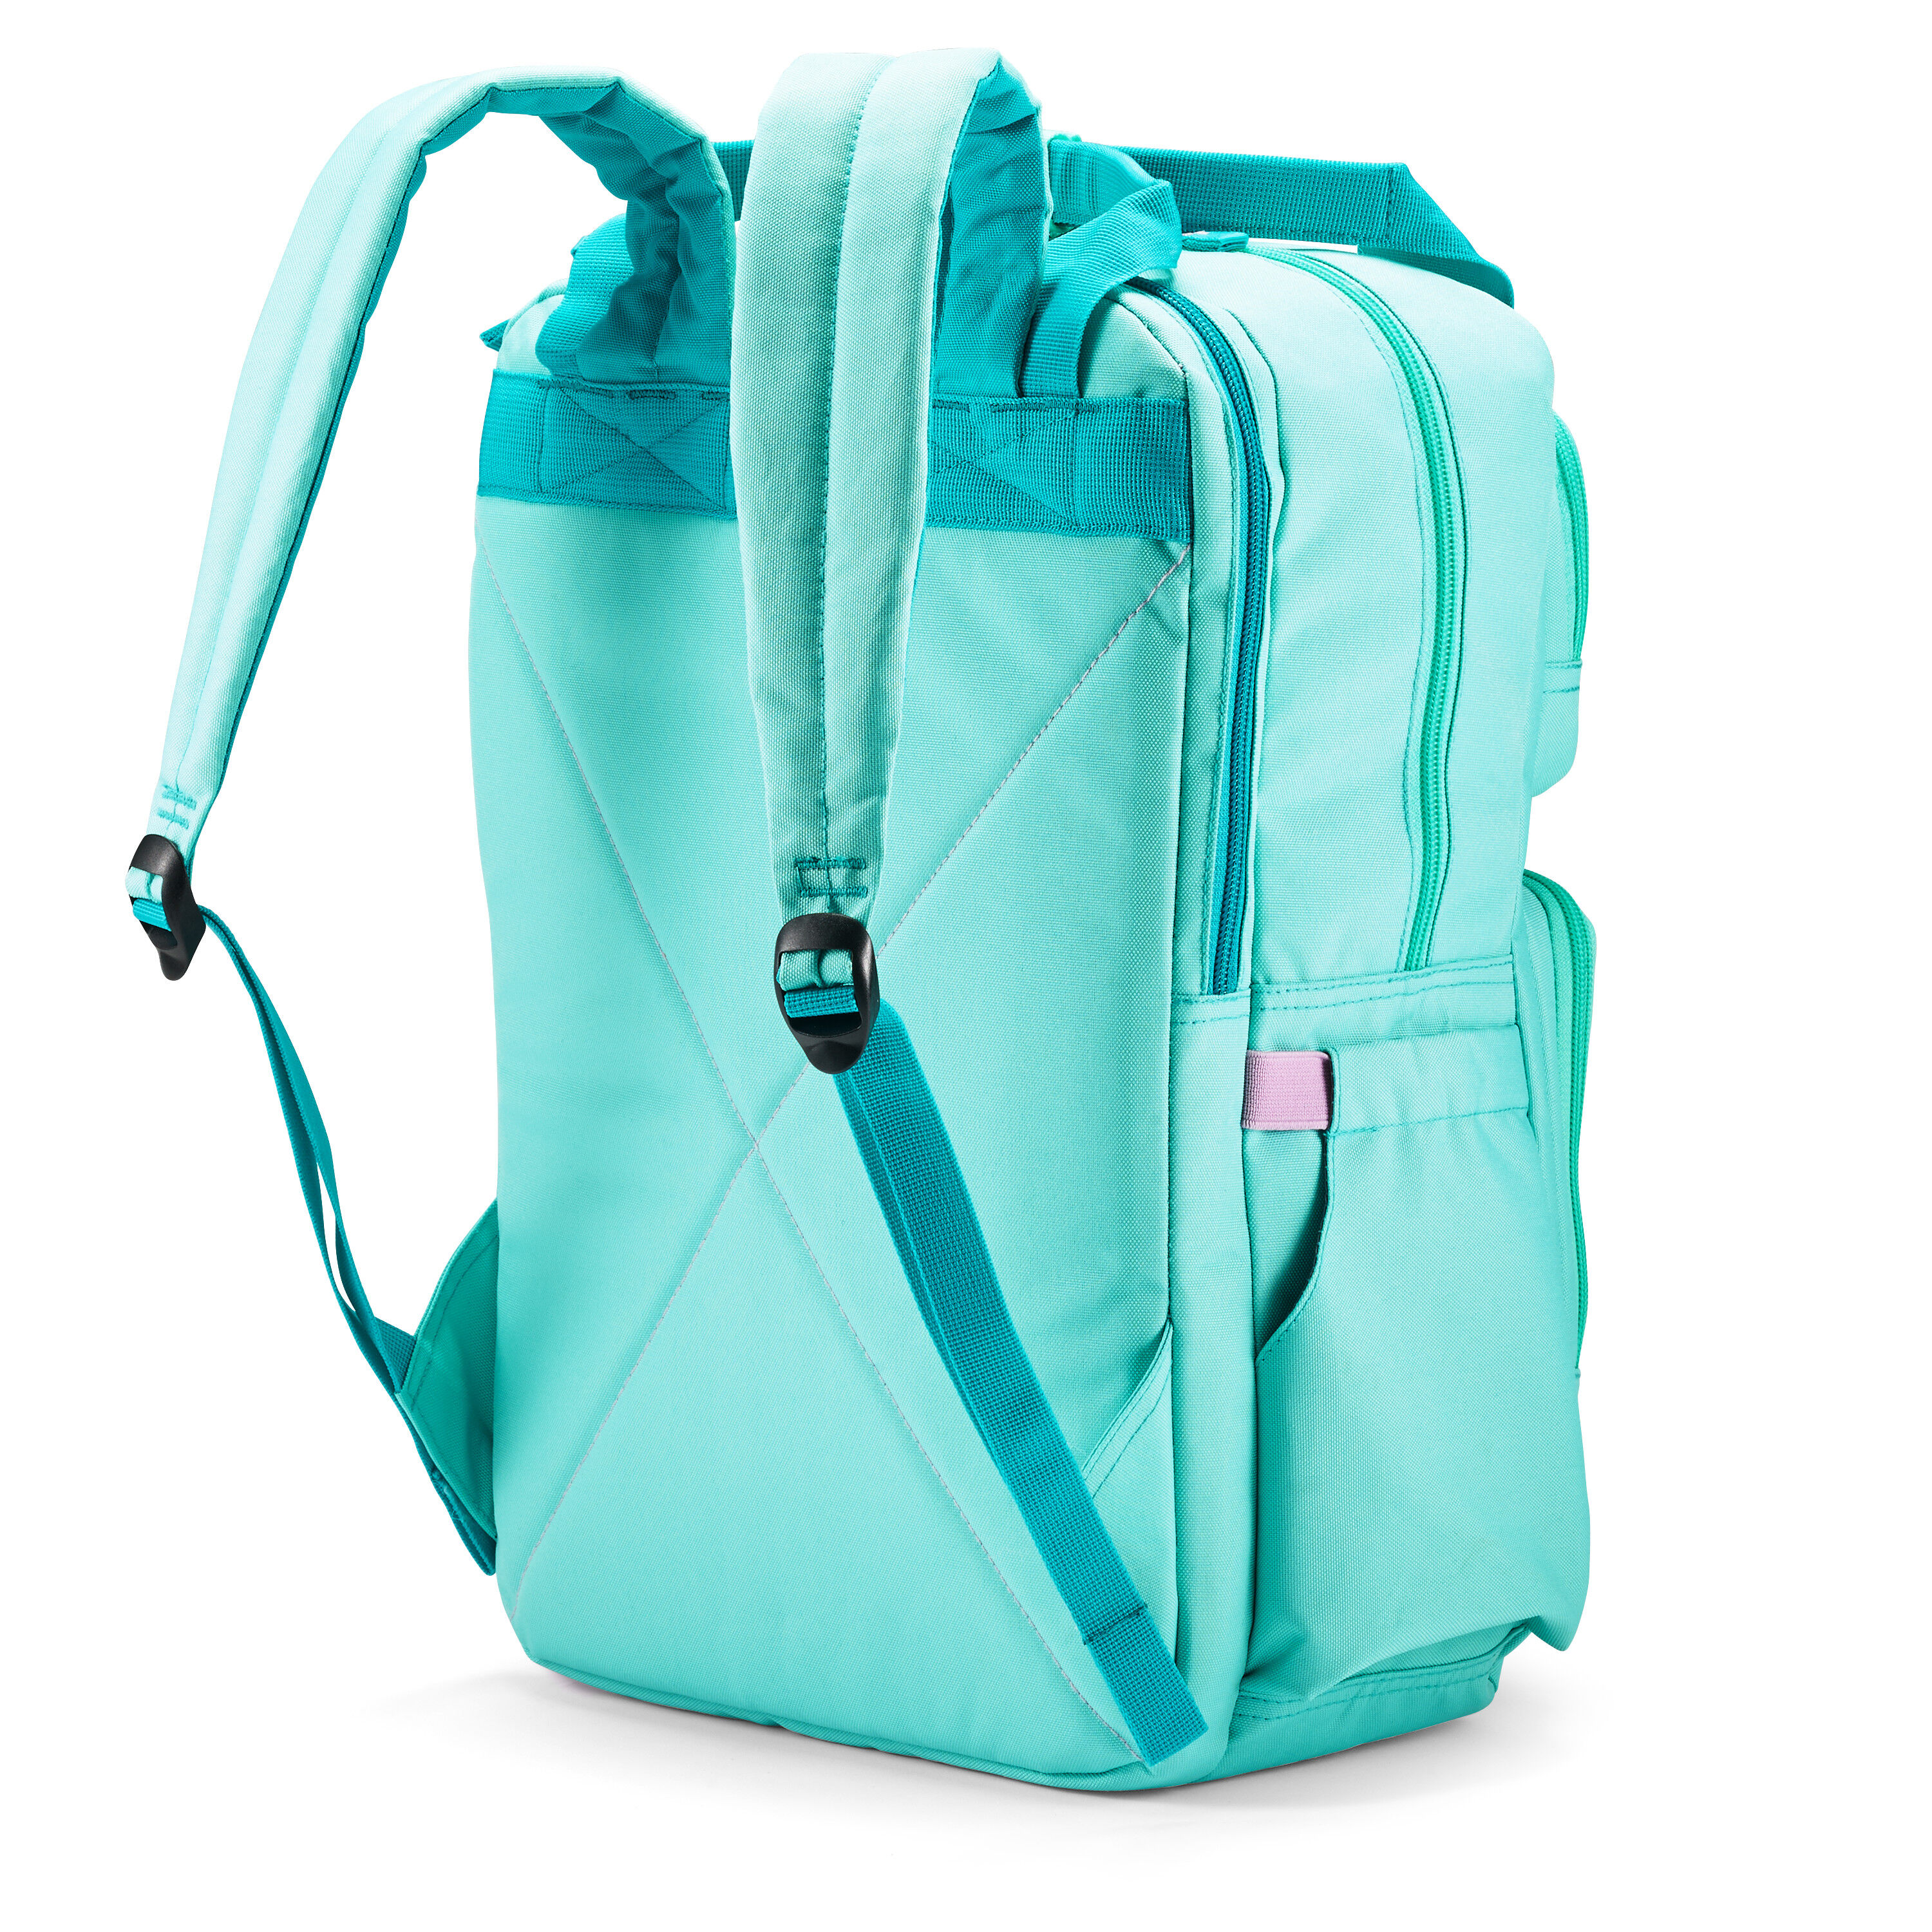 Kipling on X: Spending time outdoors with this versatile backpack